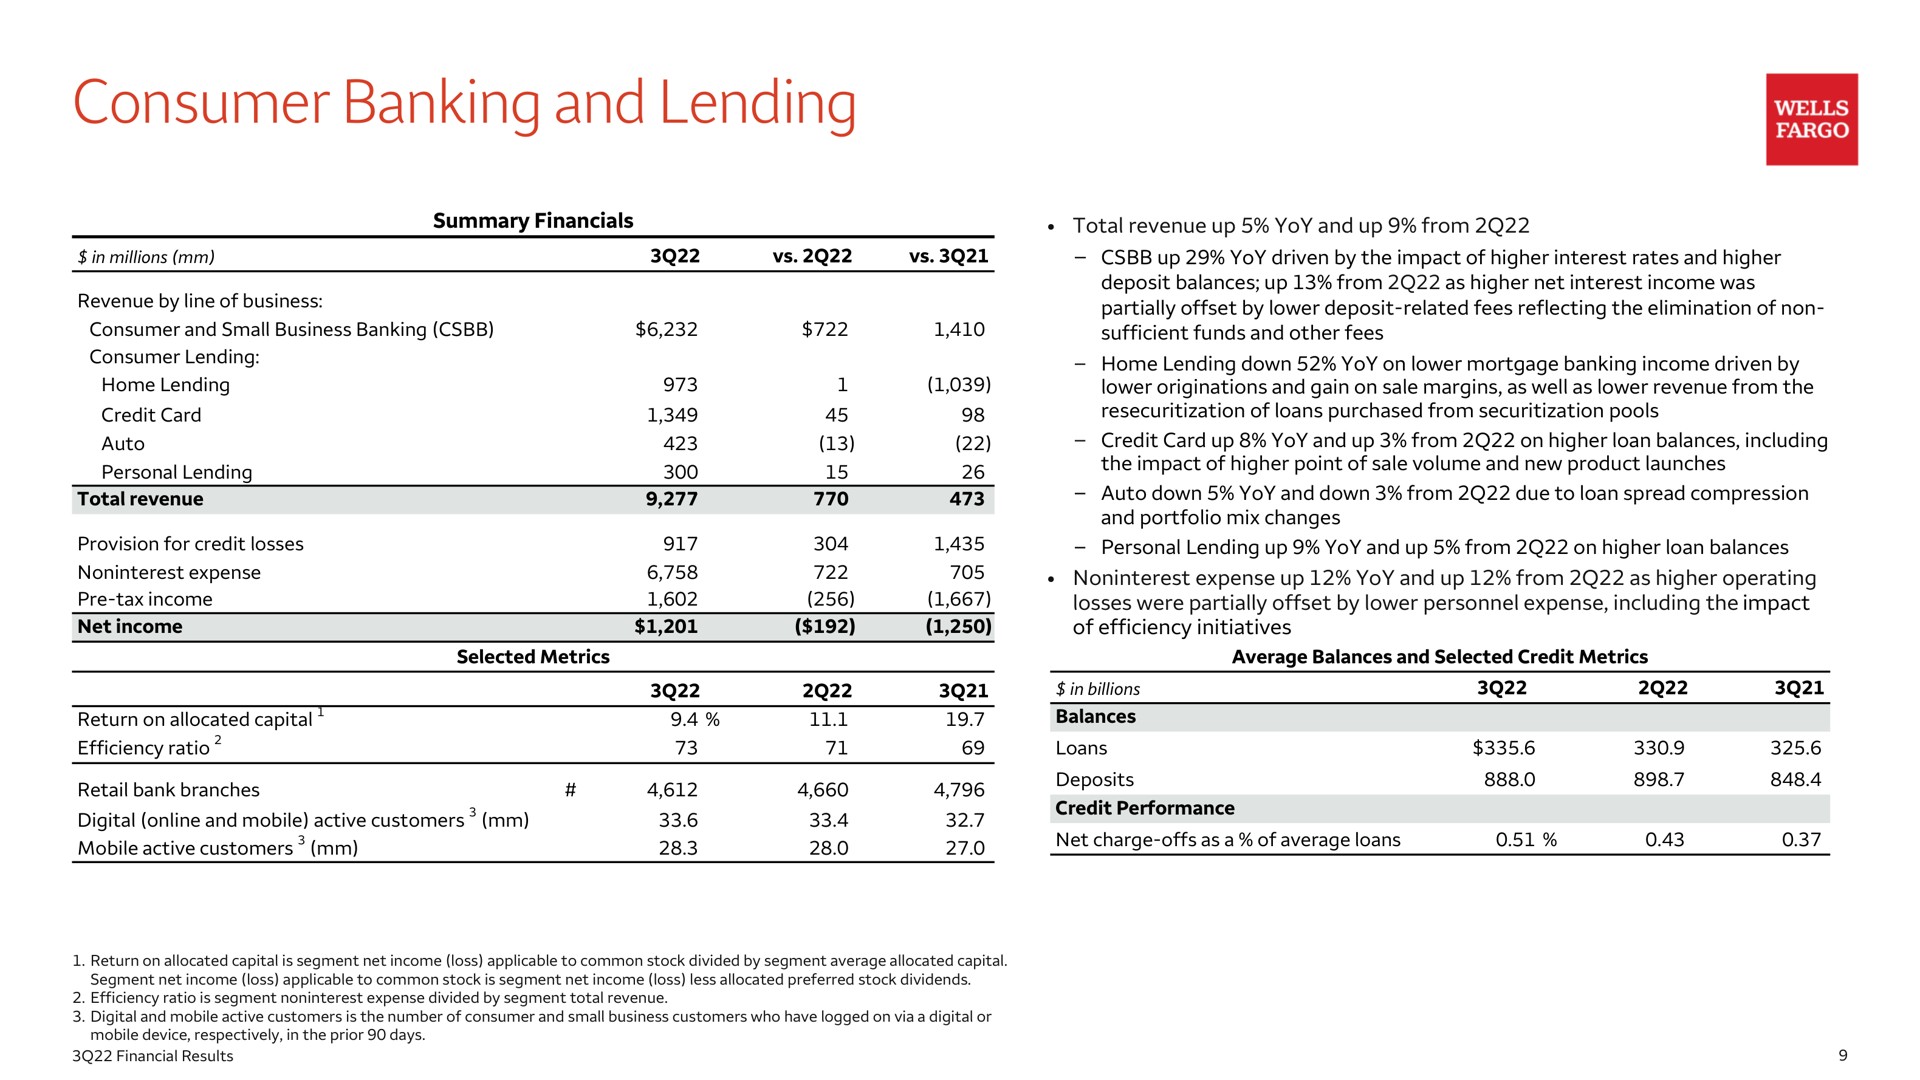 consumer banking and lending retail bank branches deposits | Wells Fargo & Company